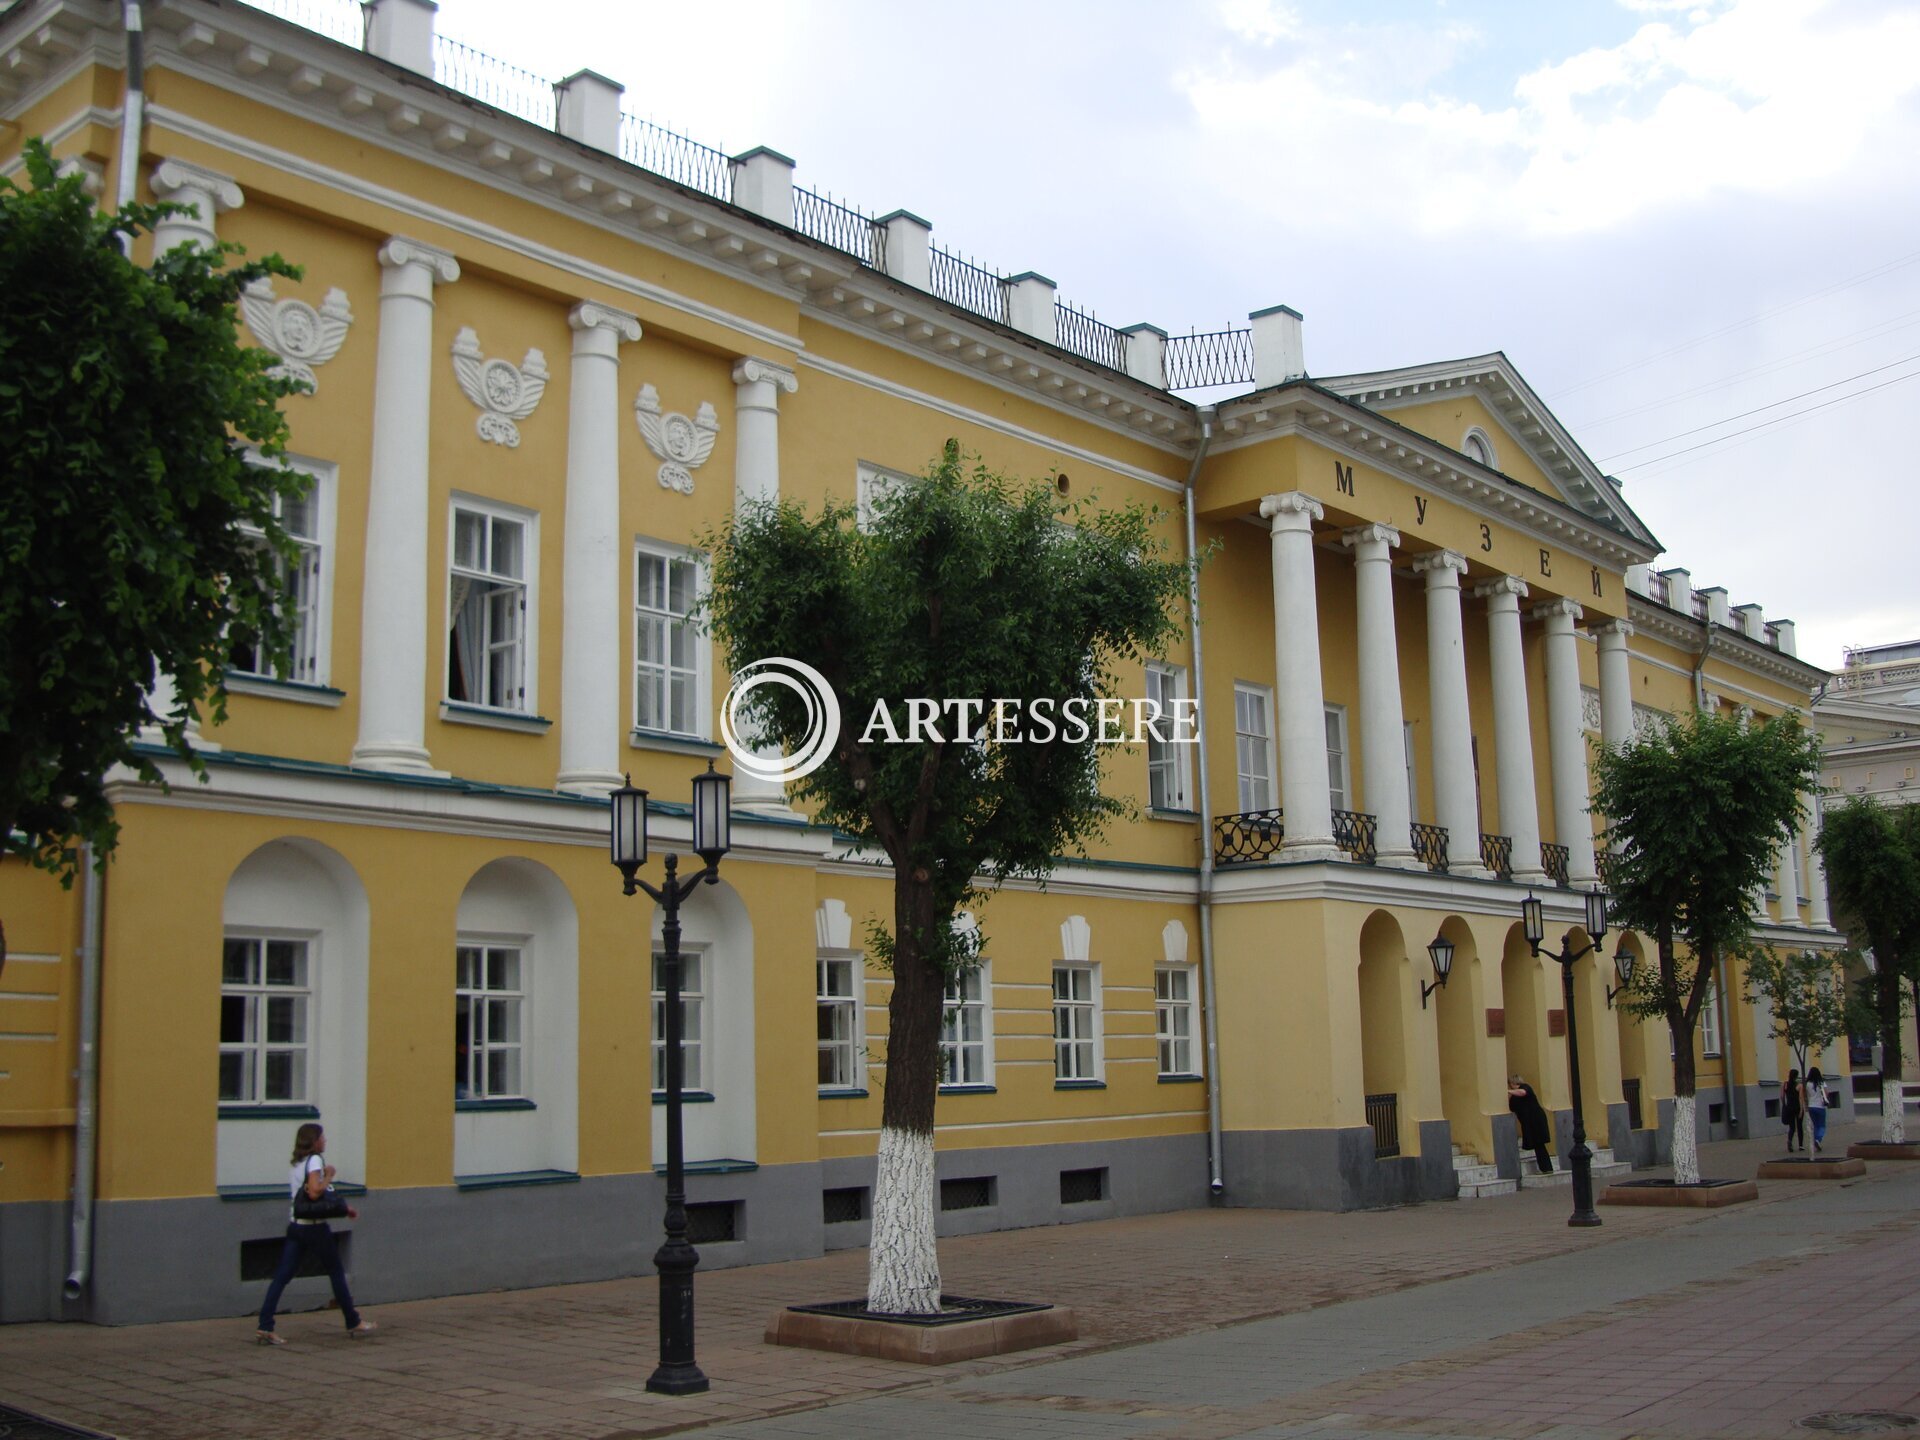 The Orenburg Governor′s Museum of History and Local Lore